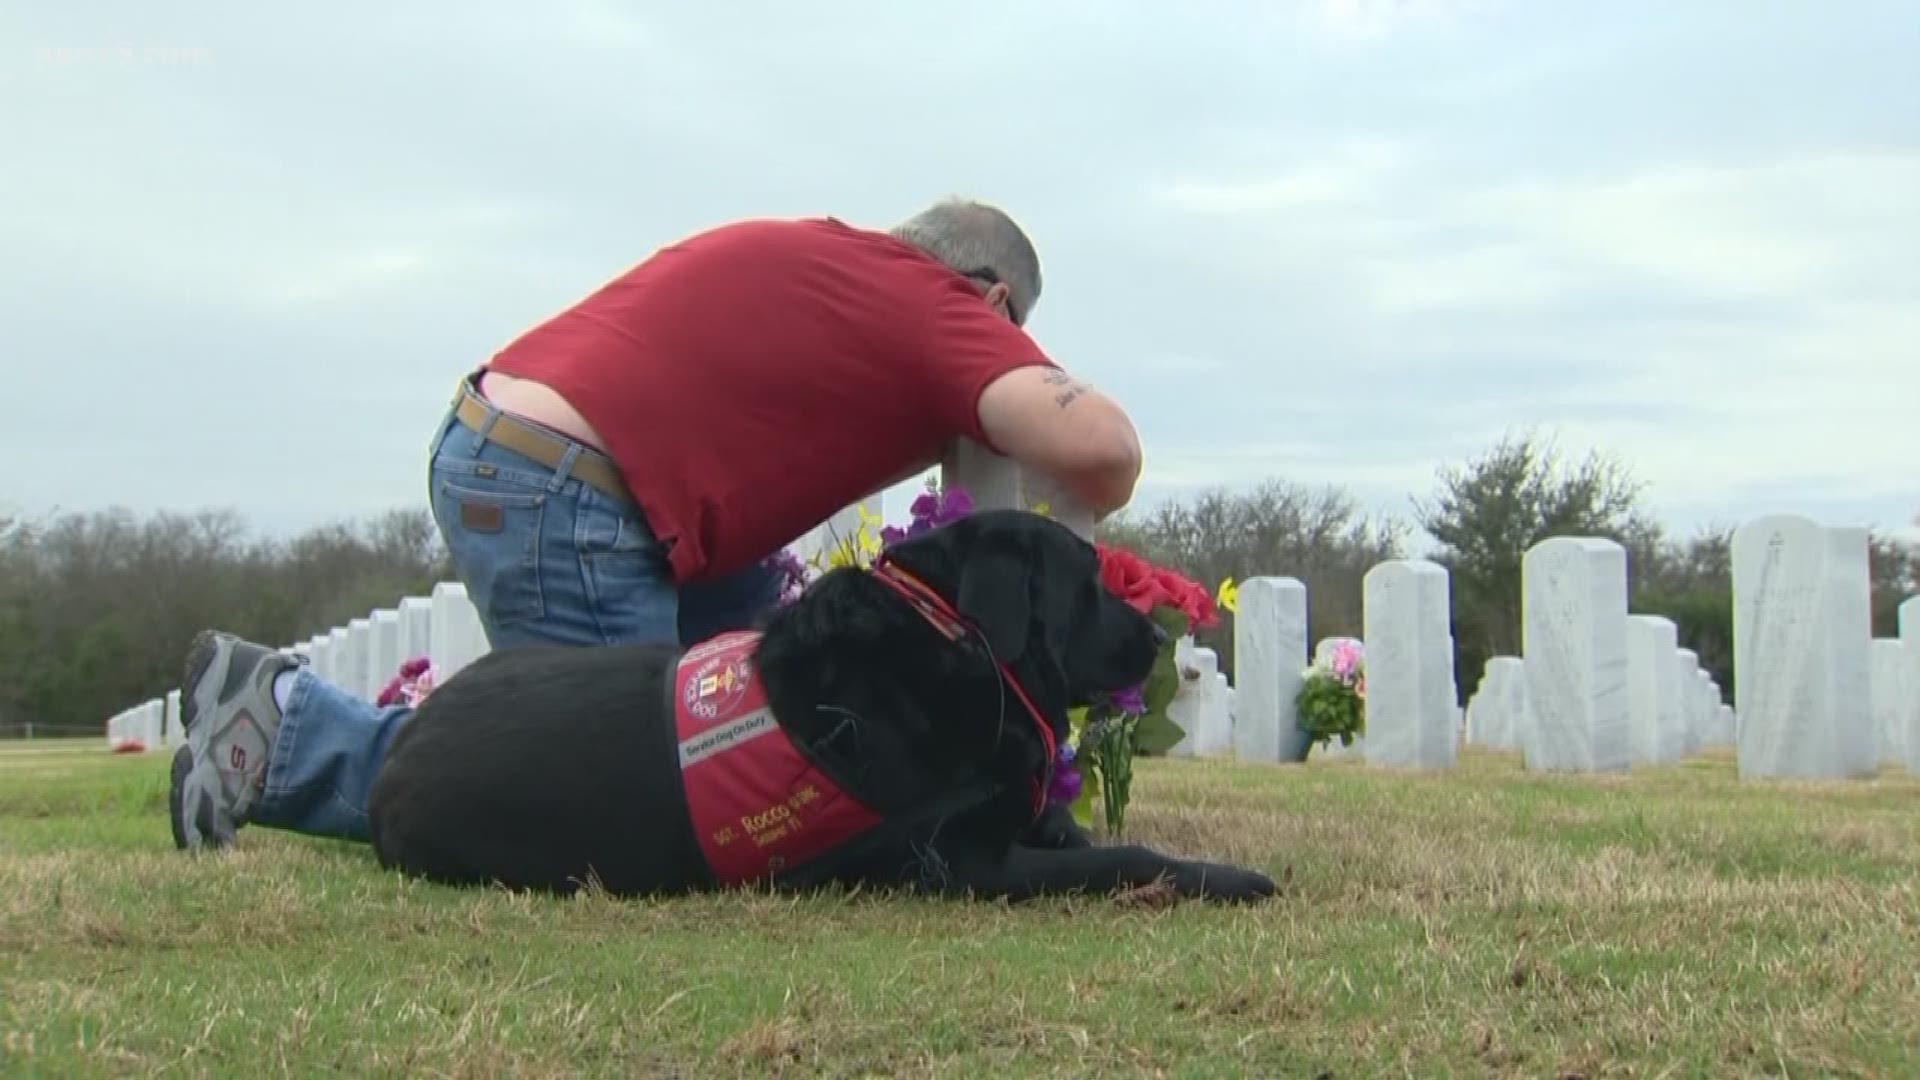 To get through the pain of losing his Marine son, Alex Ramon II has embraced his son's service dog Rocco to get him through the worst times.